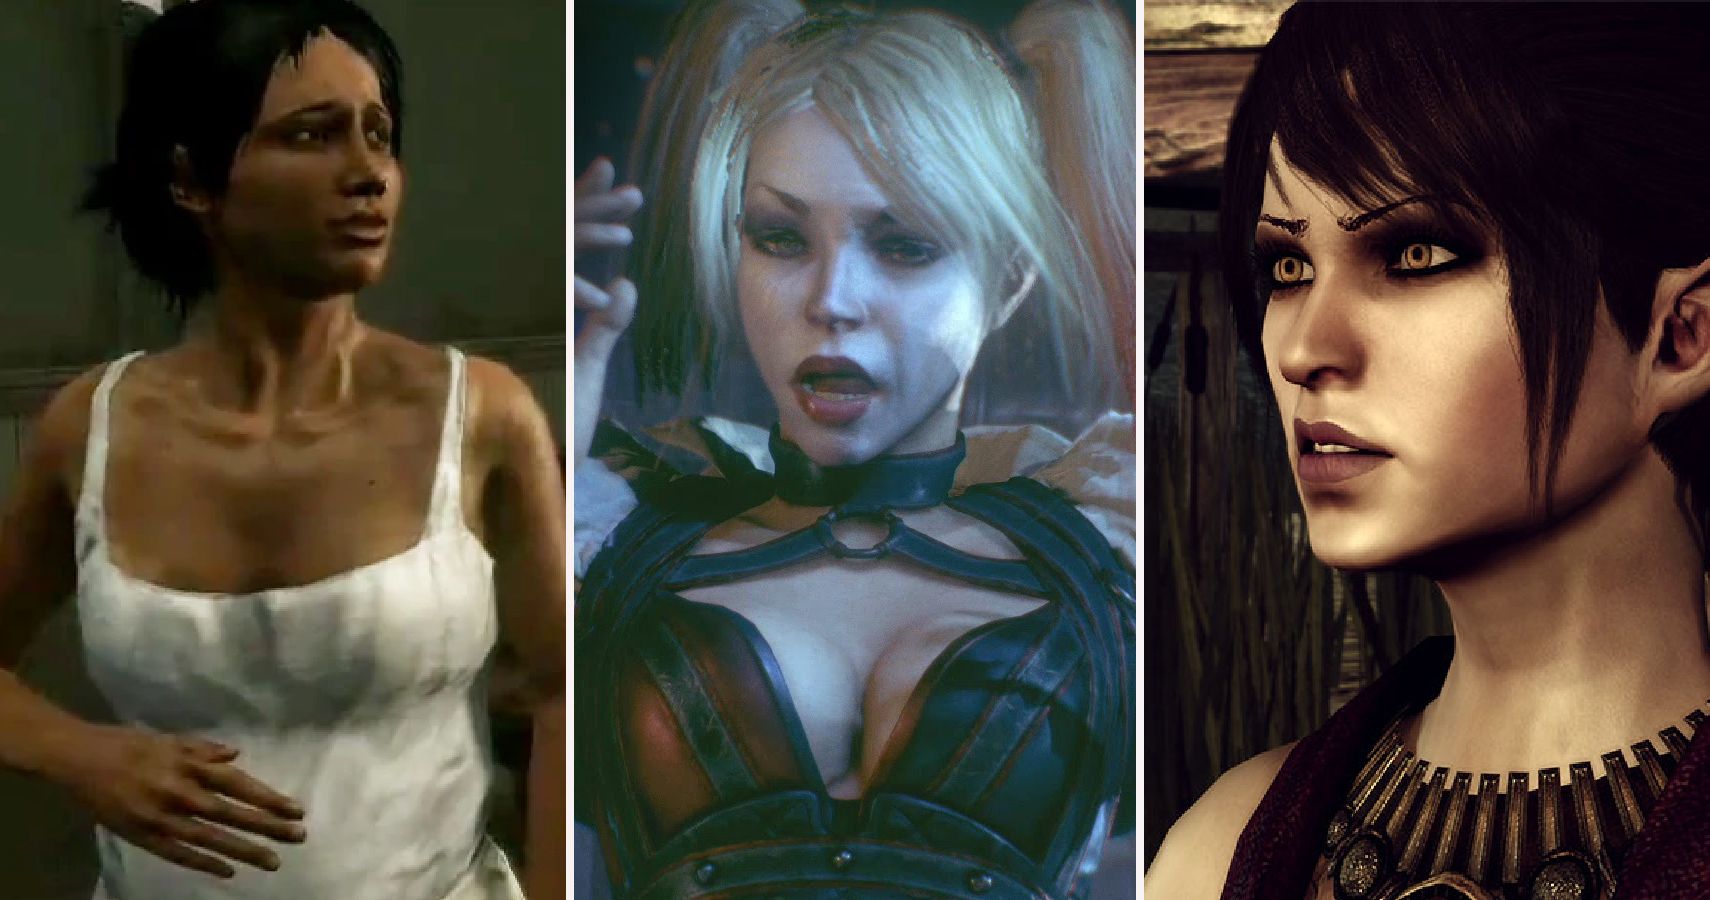 Pregnant Porn Video Game Characters - Knocked Up: Unexpected Video Game Pregnancies | TheGamer